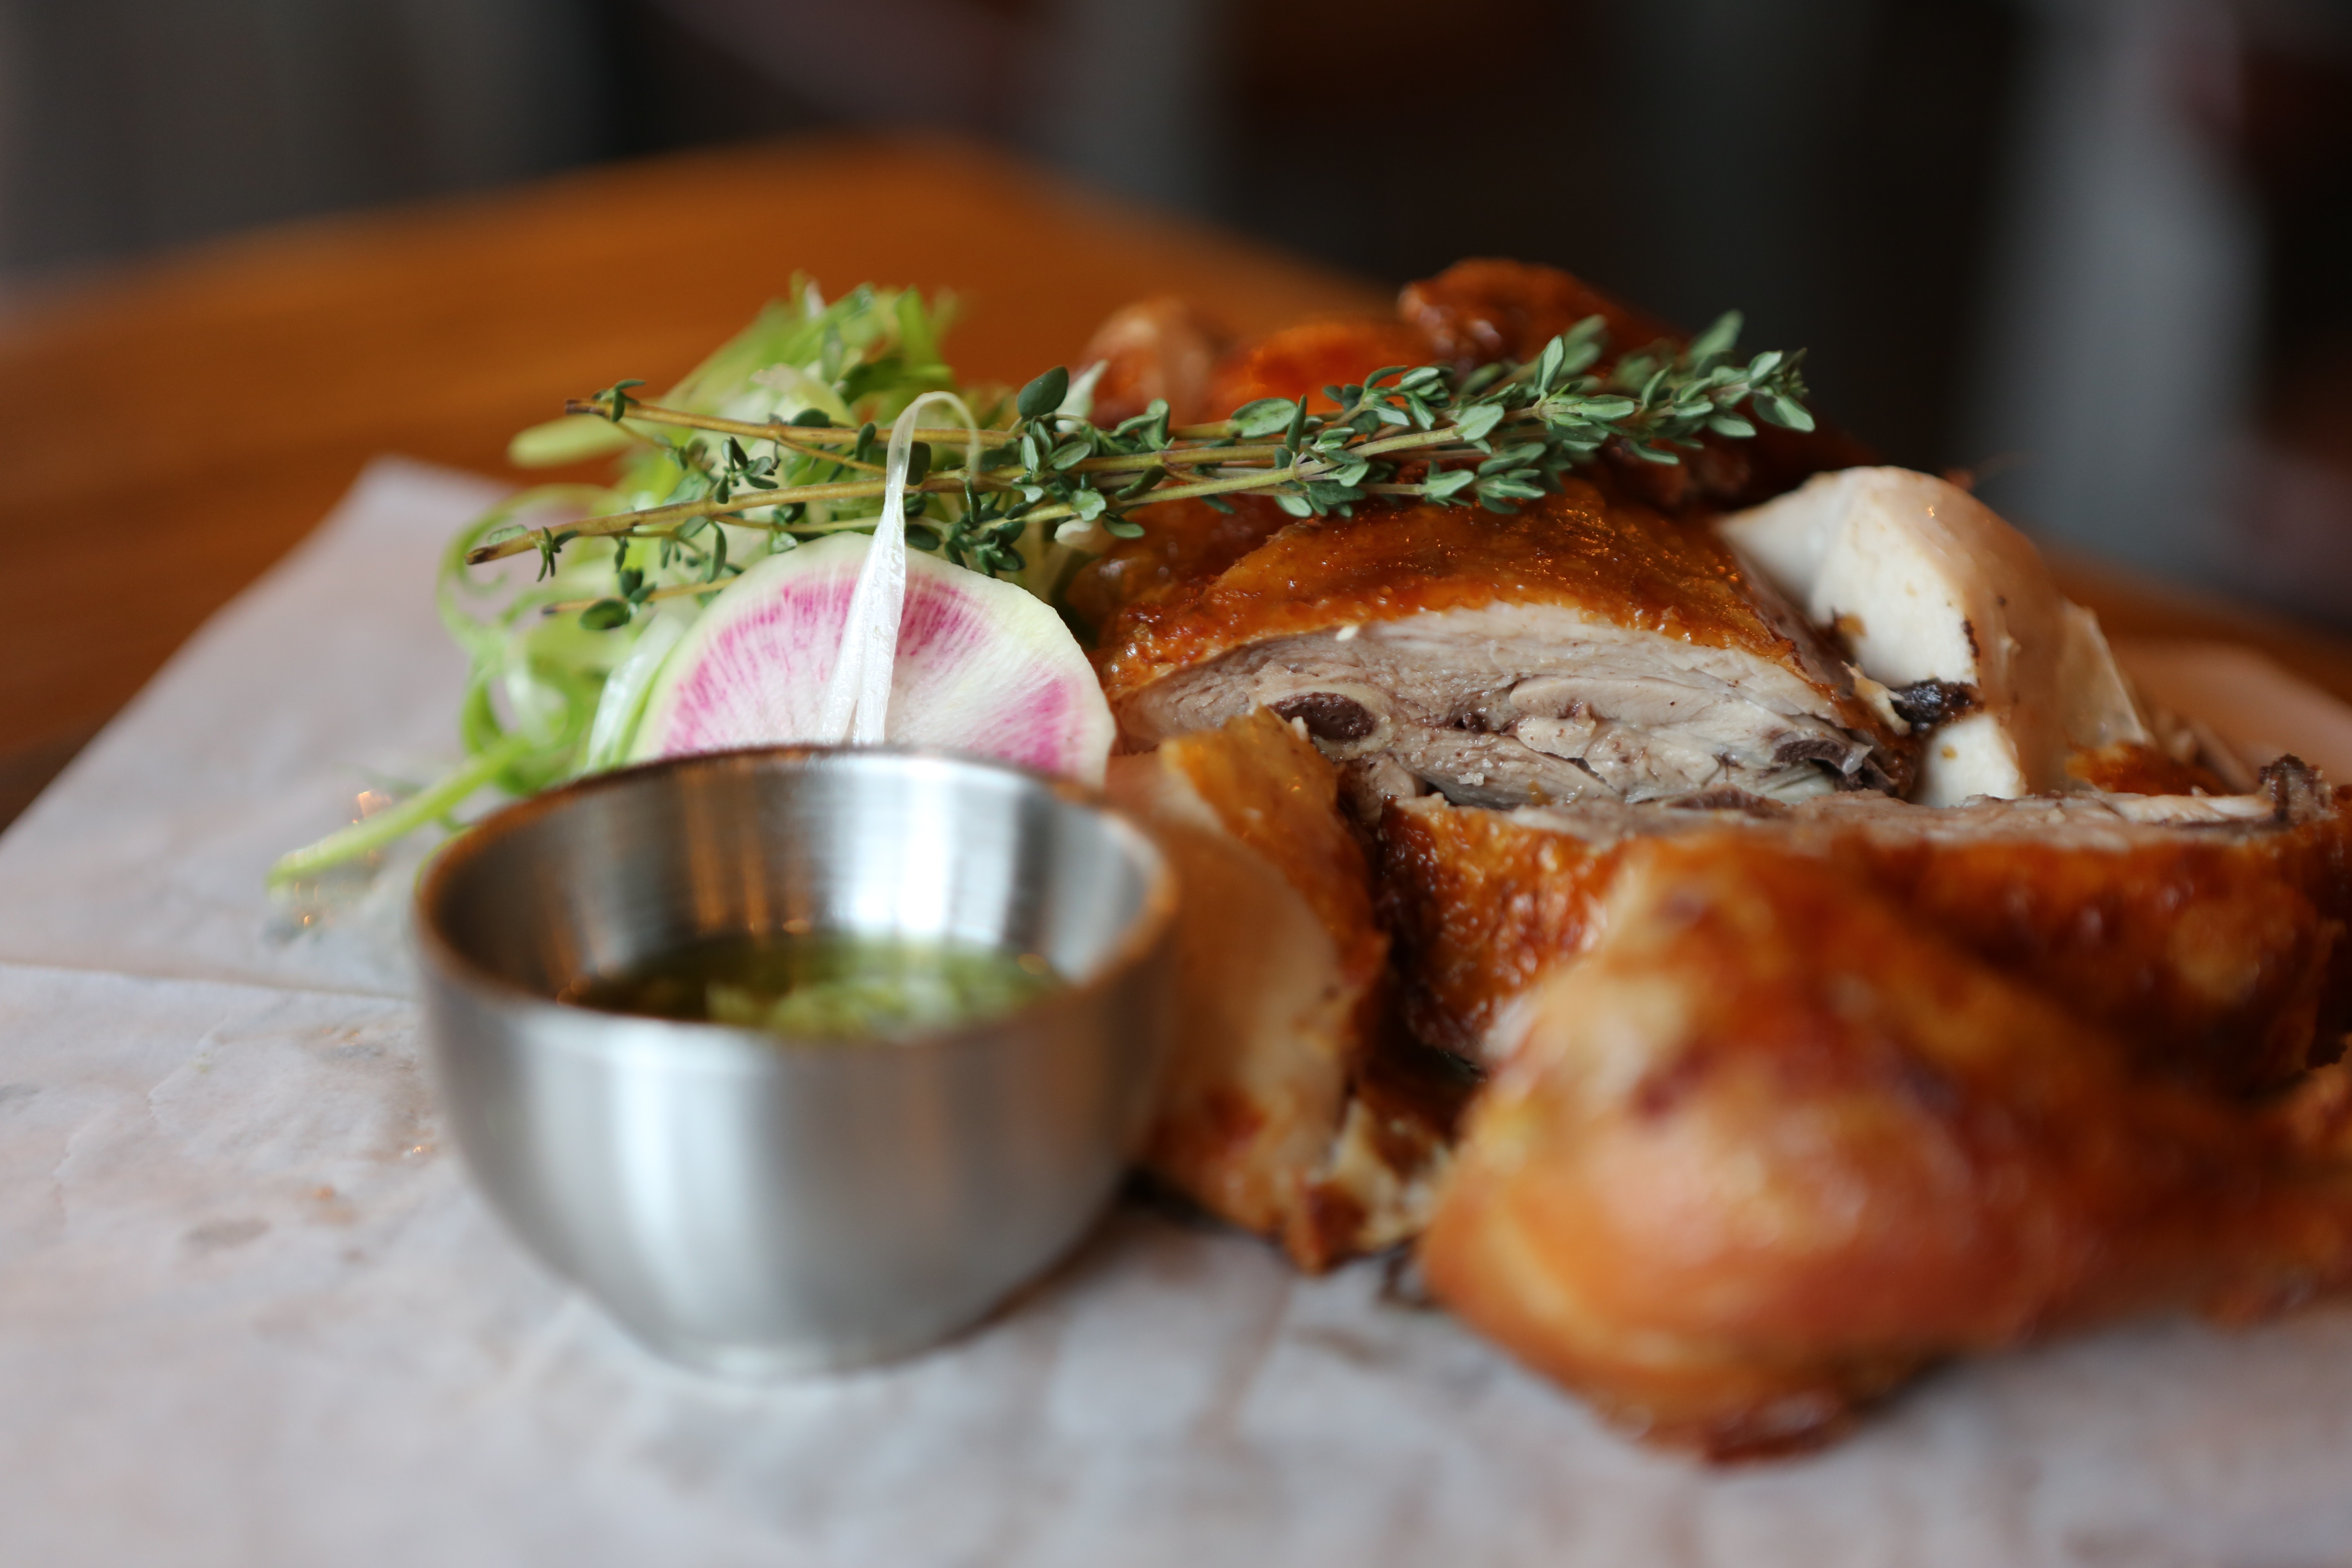 Roasted chicken on a table with herbs and a small silver bowl.